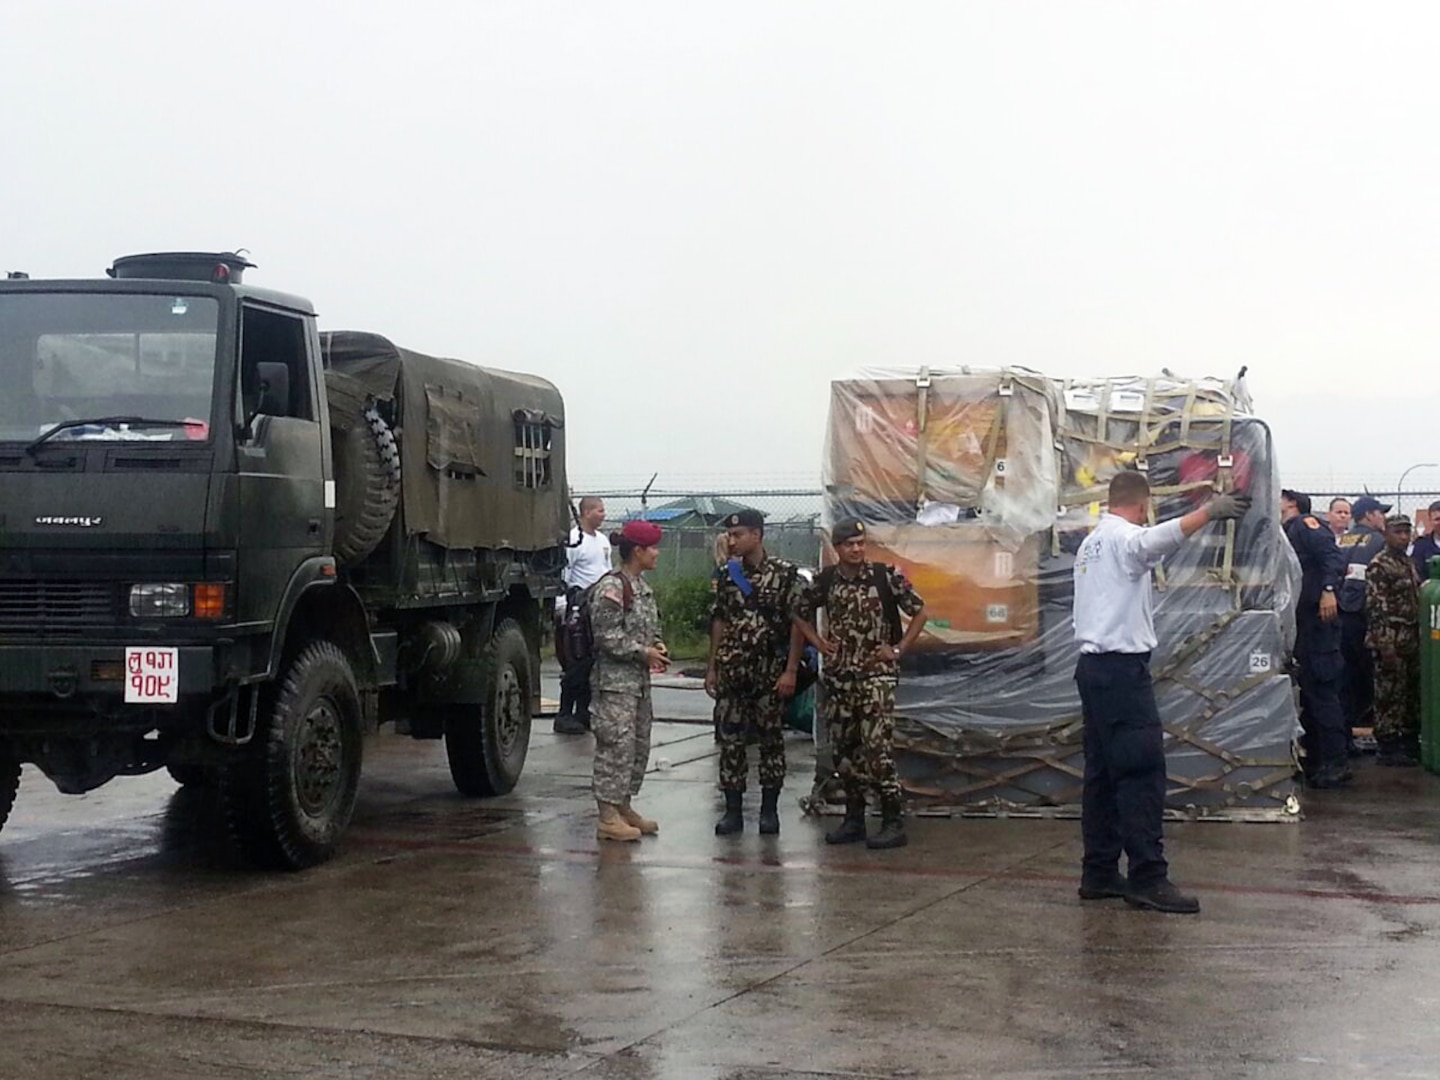 TRIBHUVAN, Nepal (Apr. 29, 2015) - The U.S. Civil Military Support Element (CMSE) Nepal coordinates with Nepalese Army soldiers at Tribhuvan International Airport to use Nepalese Army trucks to move search and rescue equipment that arrived in Nepal. A CMSE is a U.S. military civil affairs team which assists the U.S. Ambassador with civil-military programs and projects that support U.S. and host-nation objectives. 